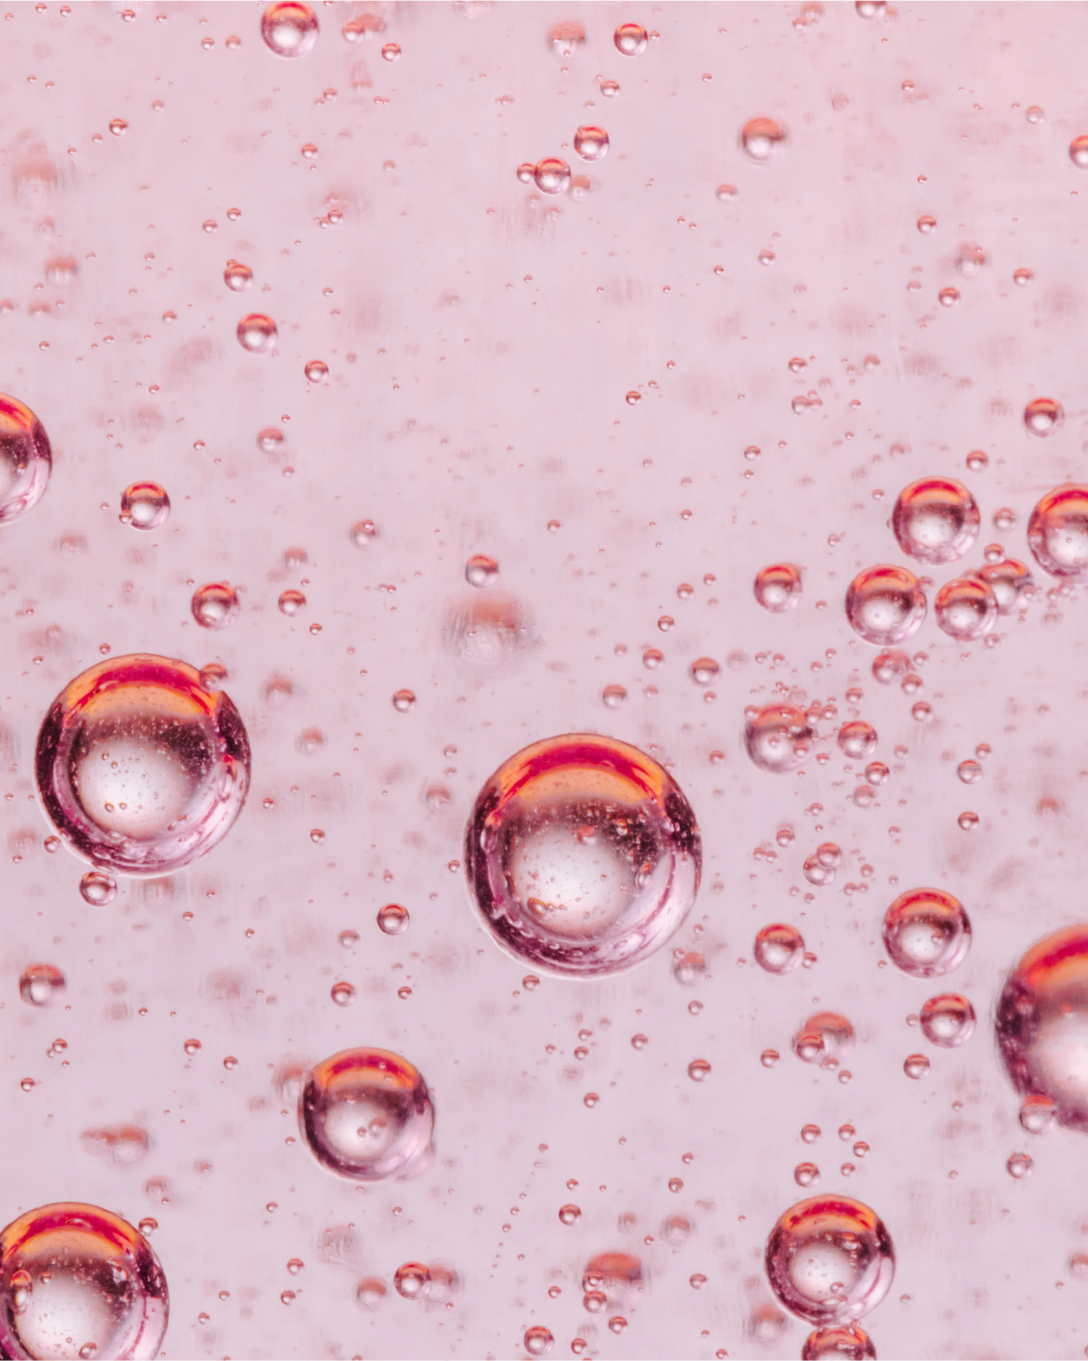 rose liquid with bubbles